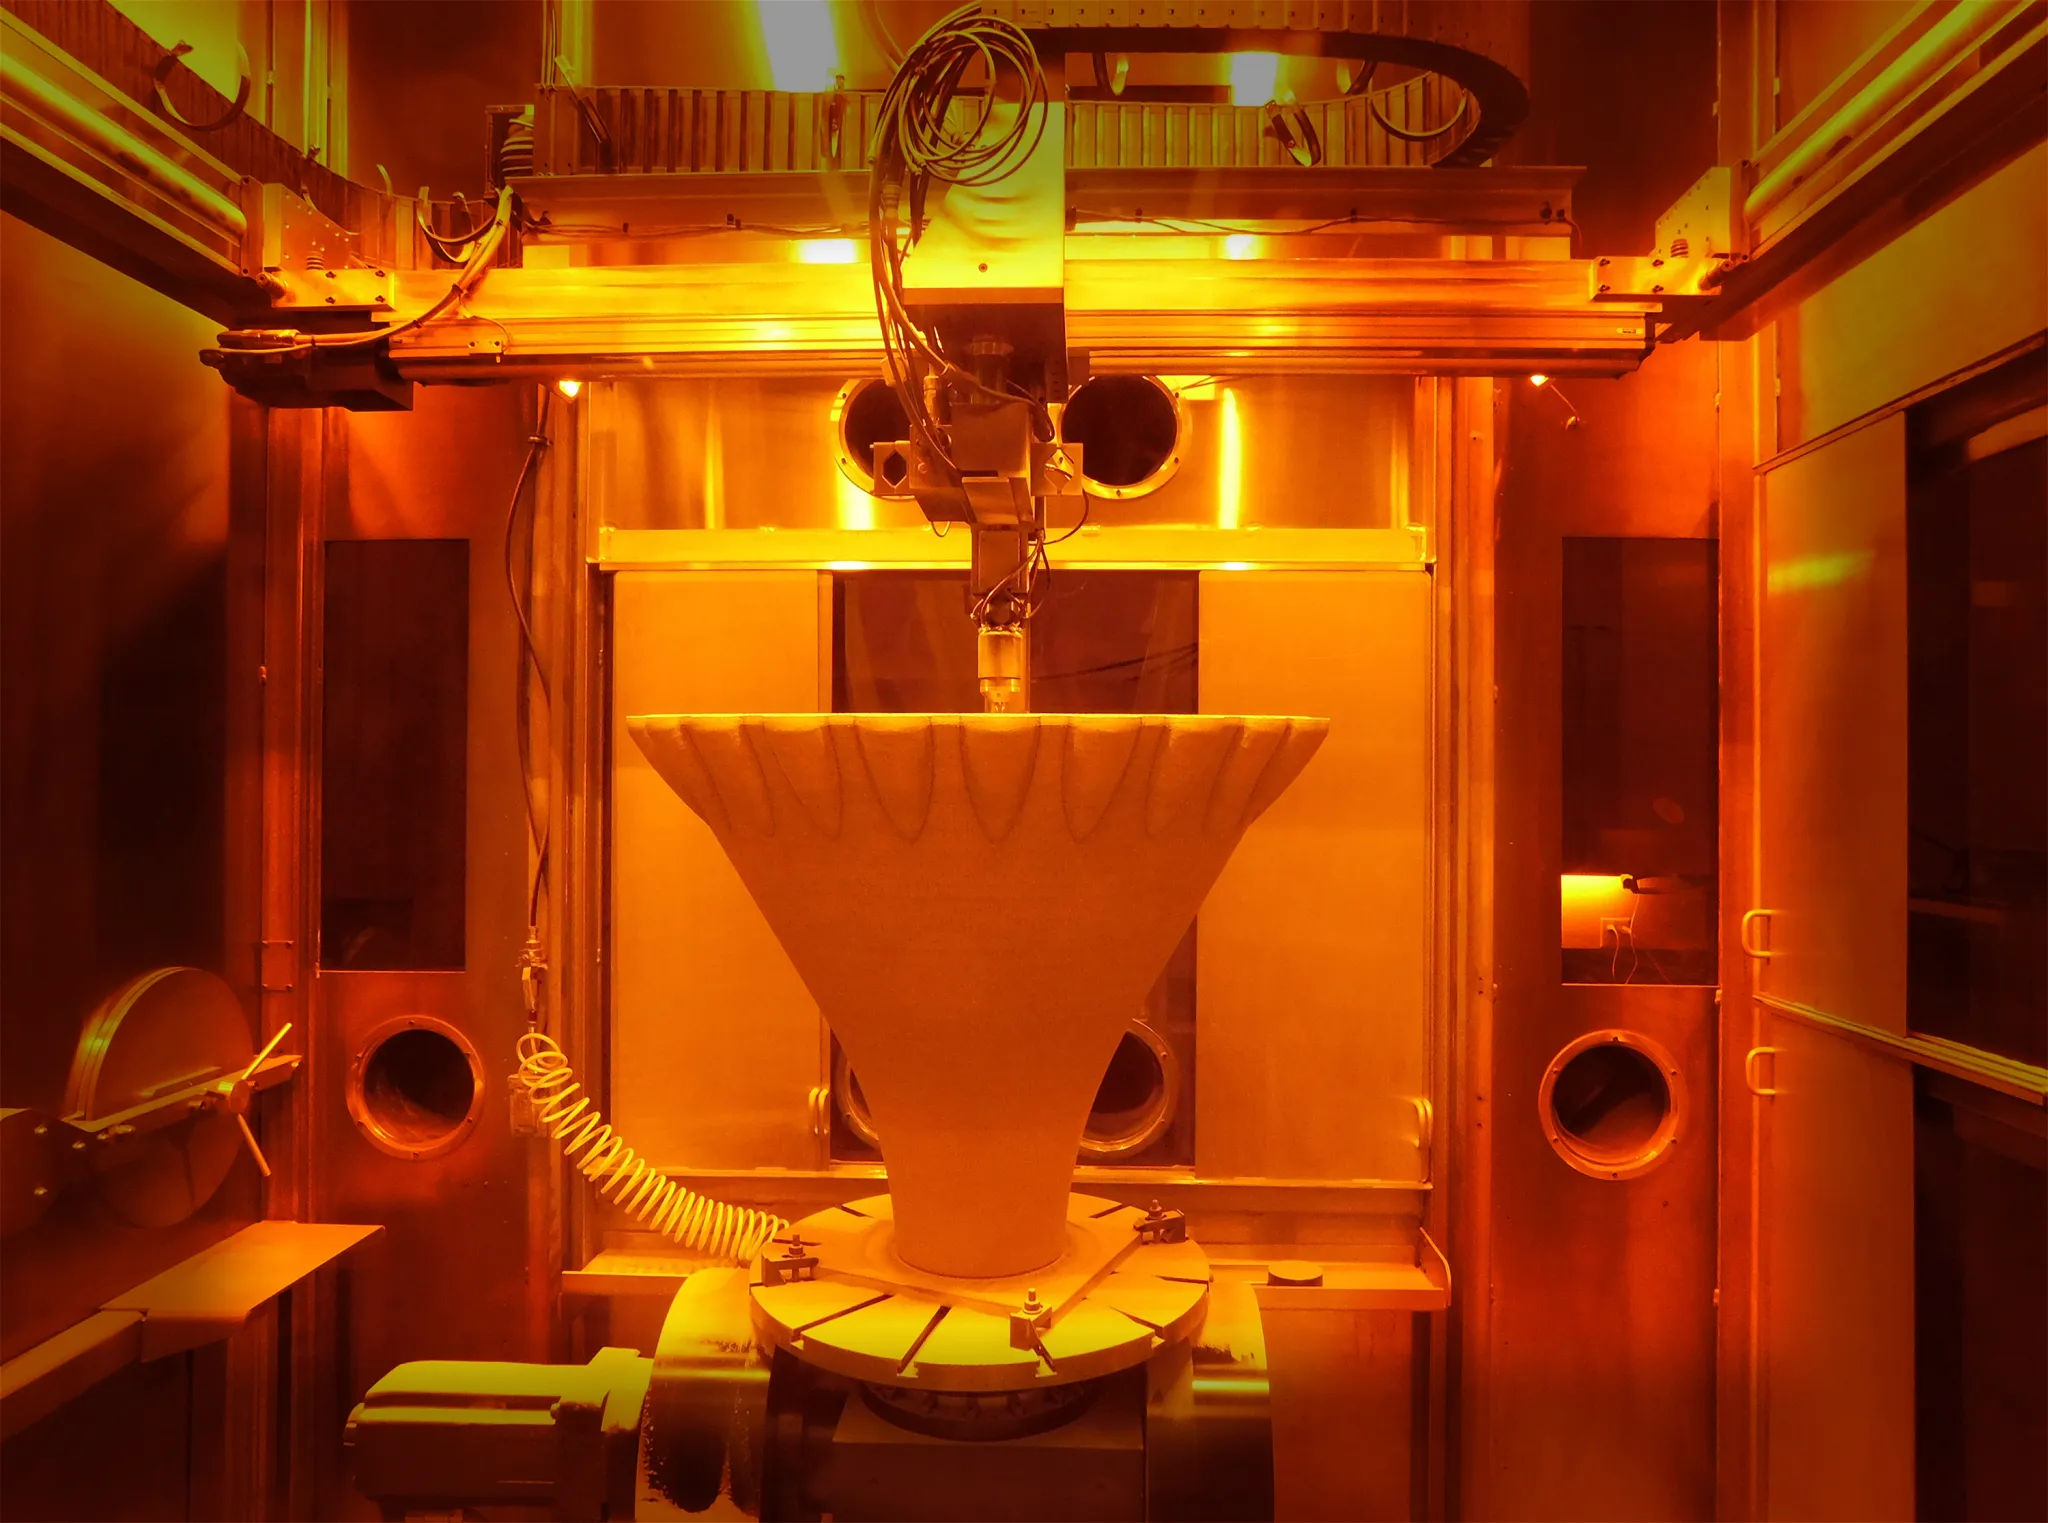 A nozzle is being created by a 3D printer layer by layer. The photo has a golden hue from the light and laser.